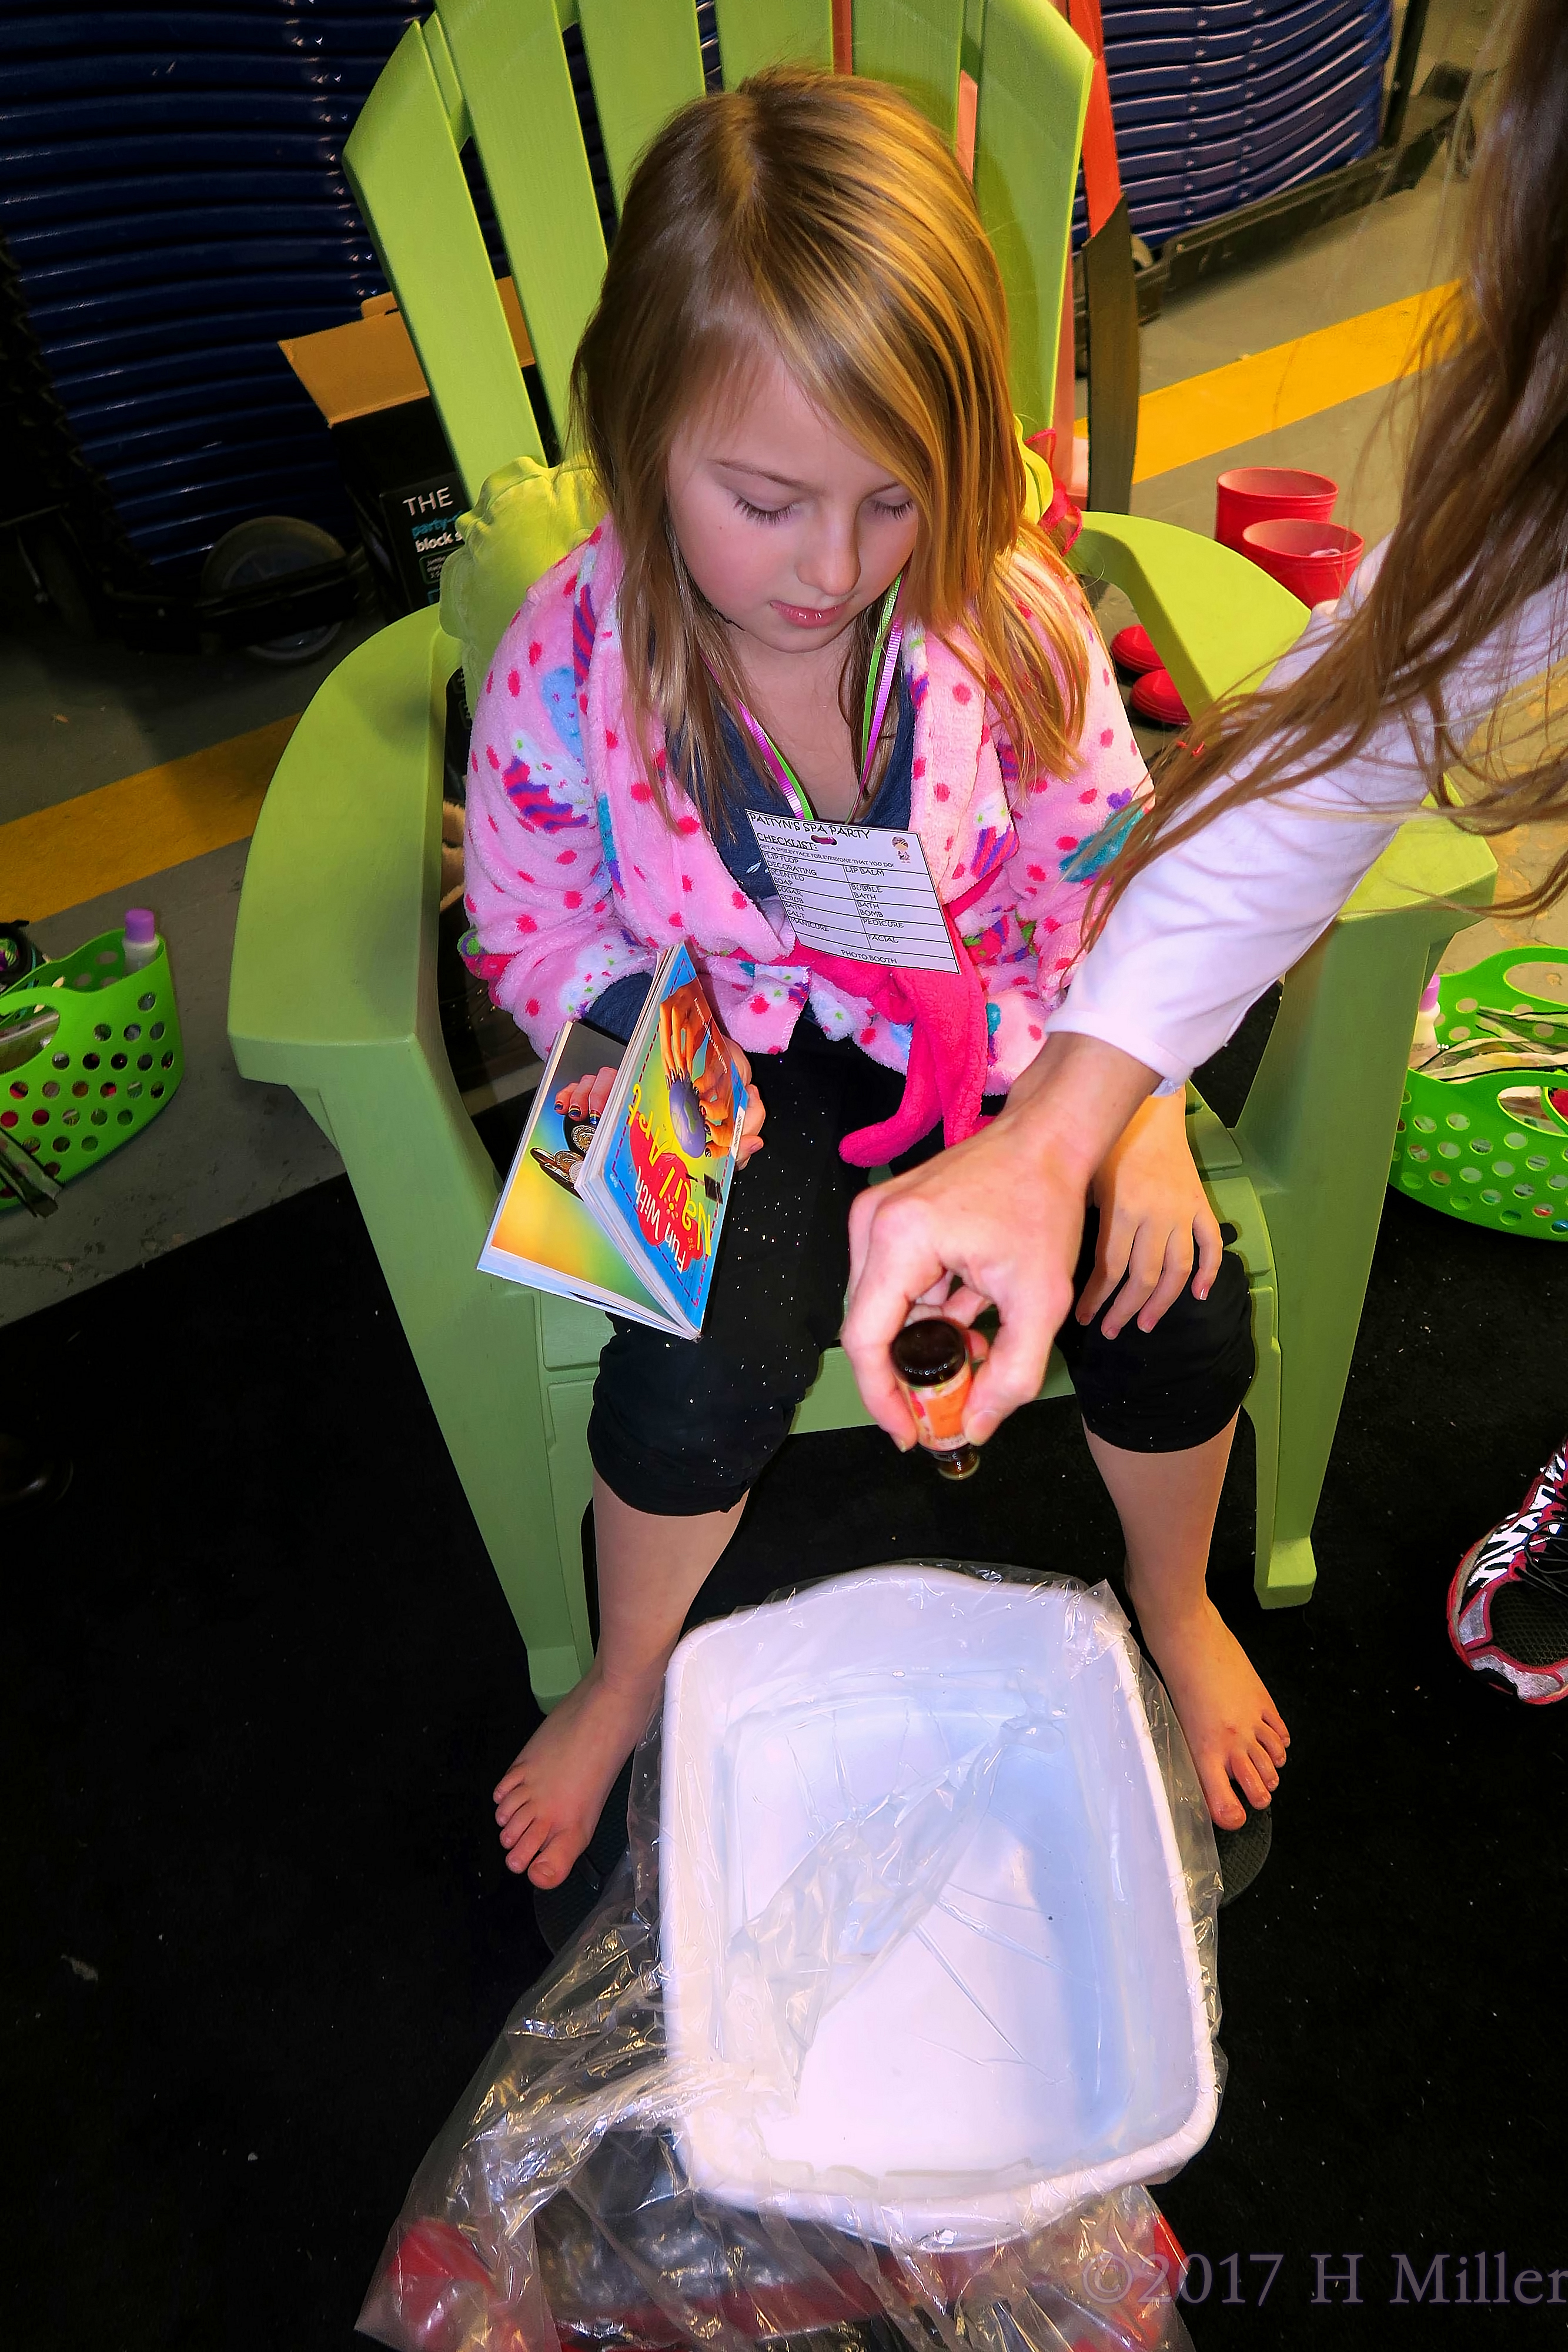 Pedicures For Girls Means A Sweet Smelling Essential Oil! 